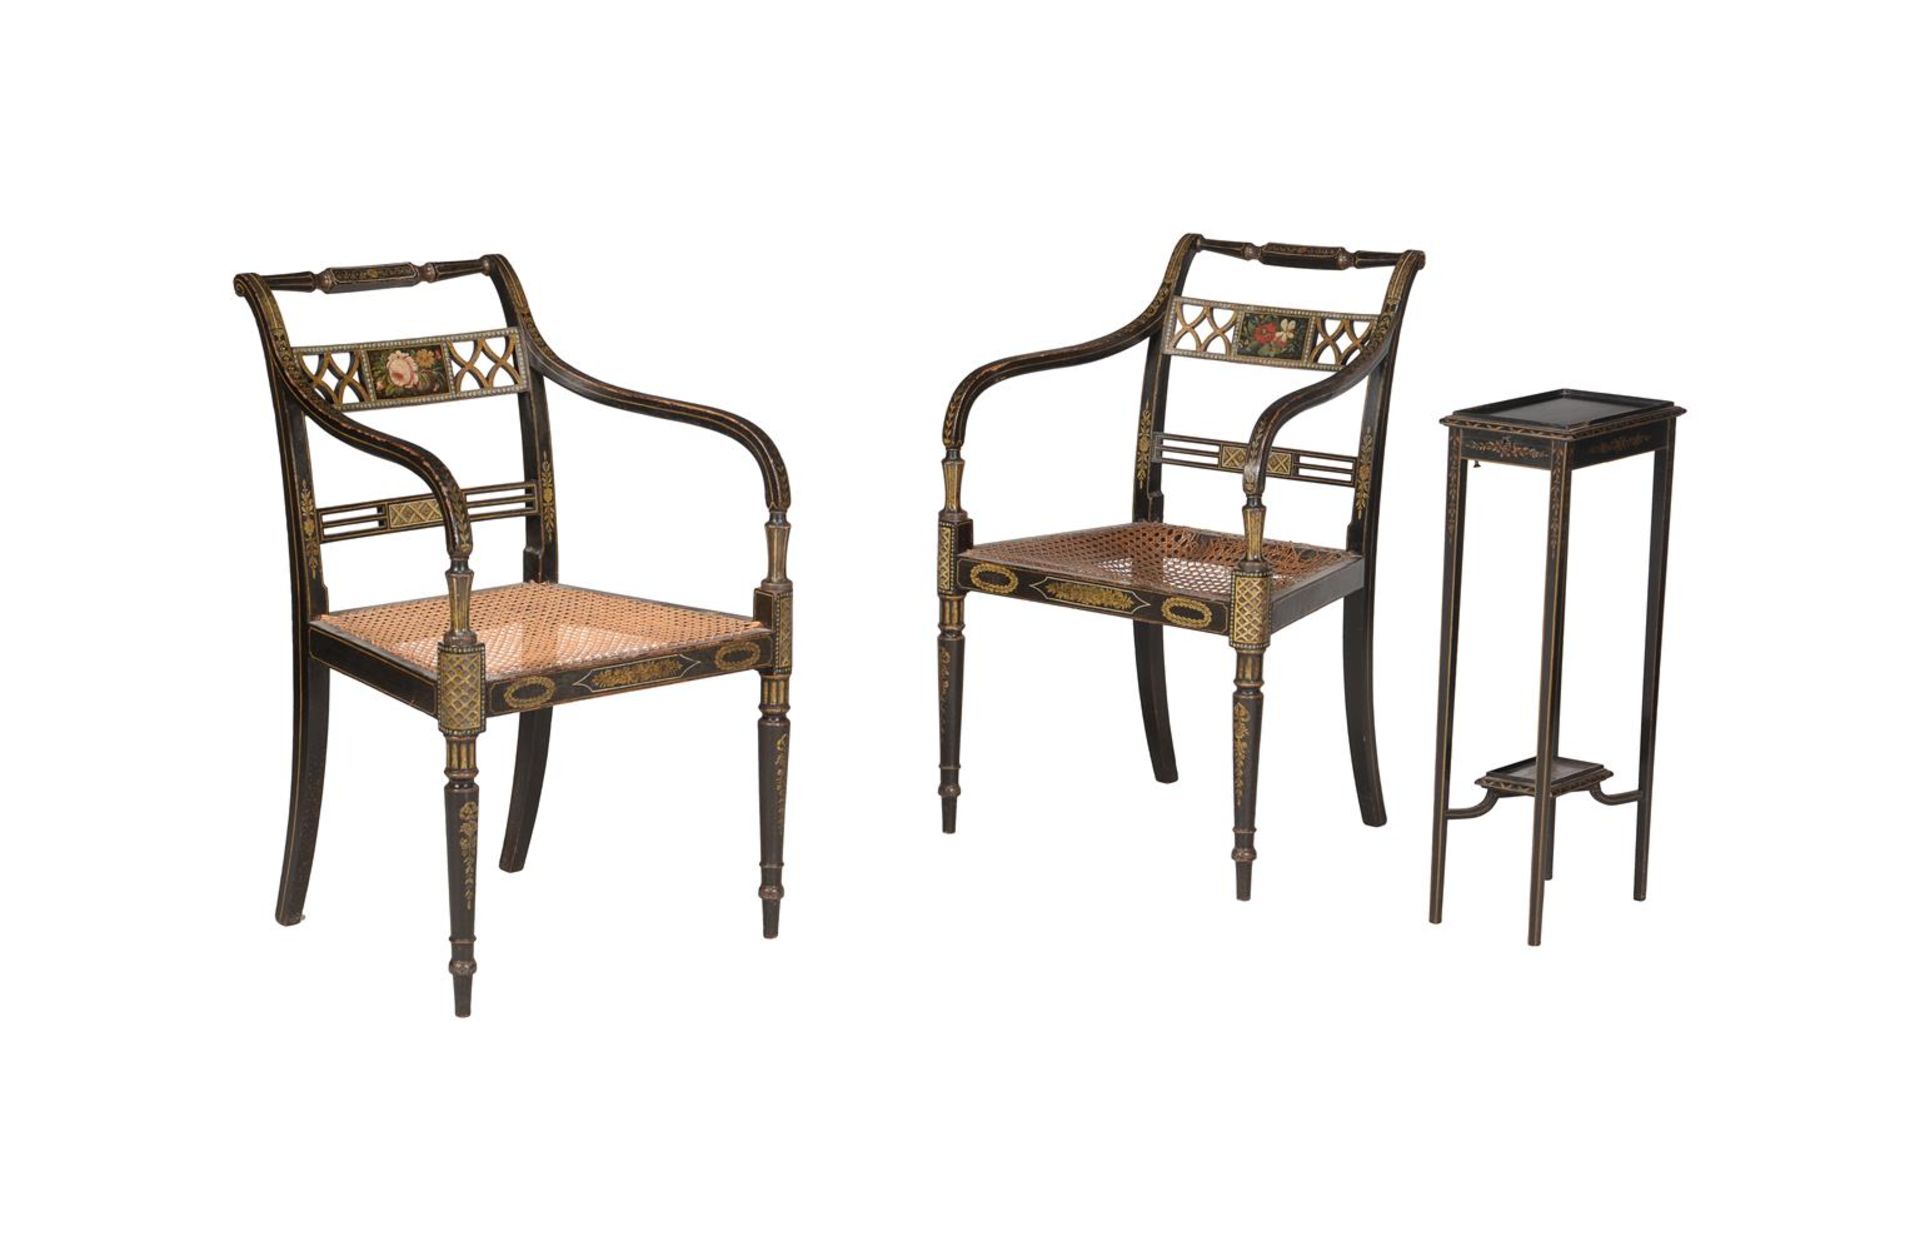 A PAIR OF REGENCY EBONISED, GILT AND POLYCHROME PAINTED ARMCHAIRS